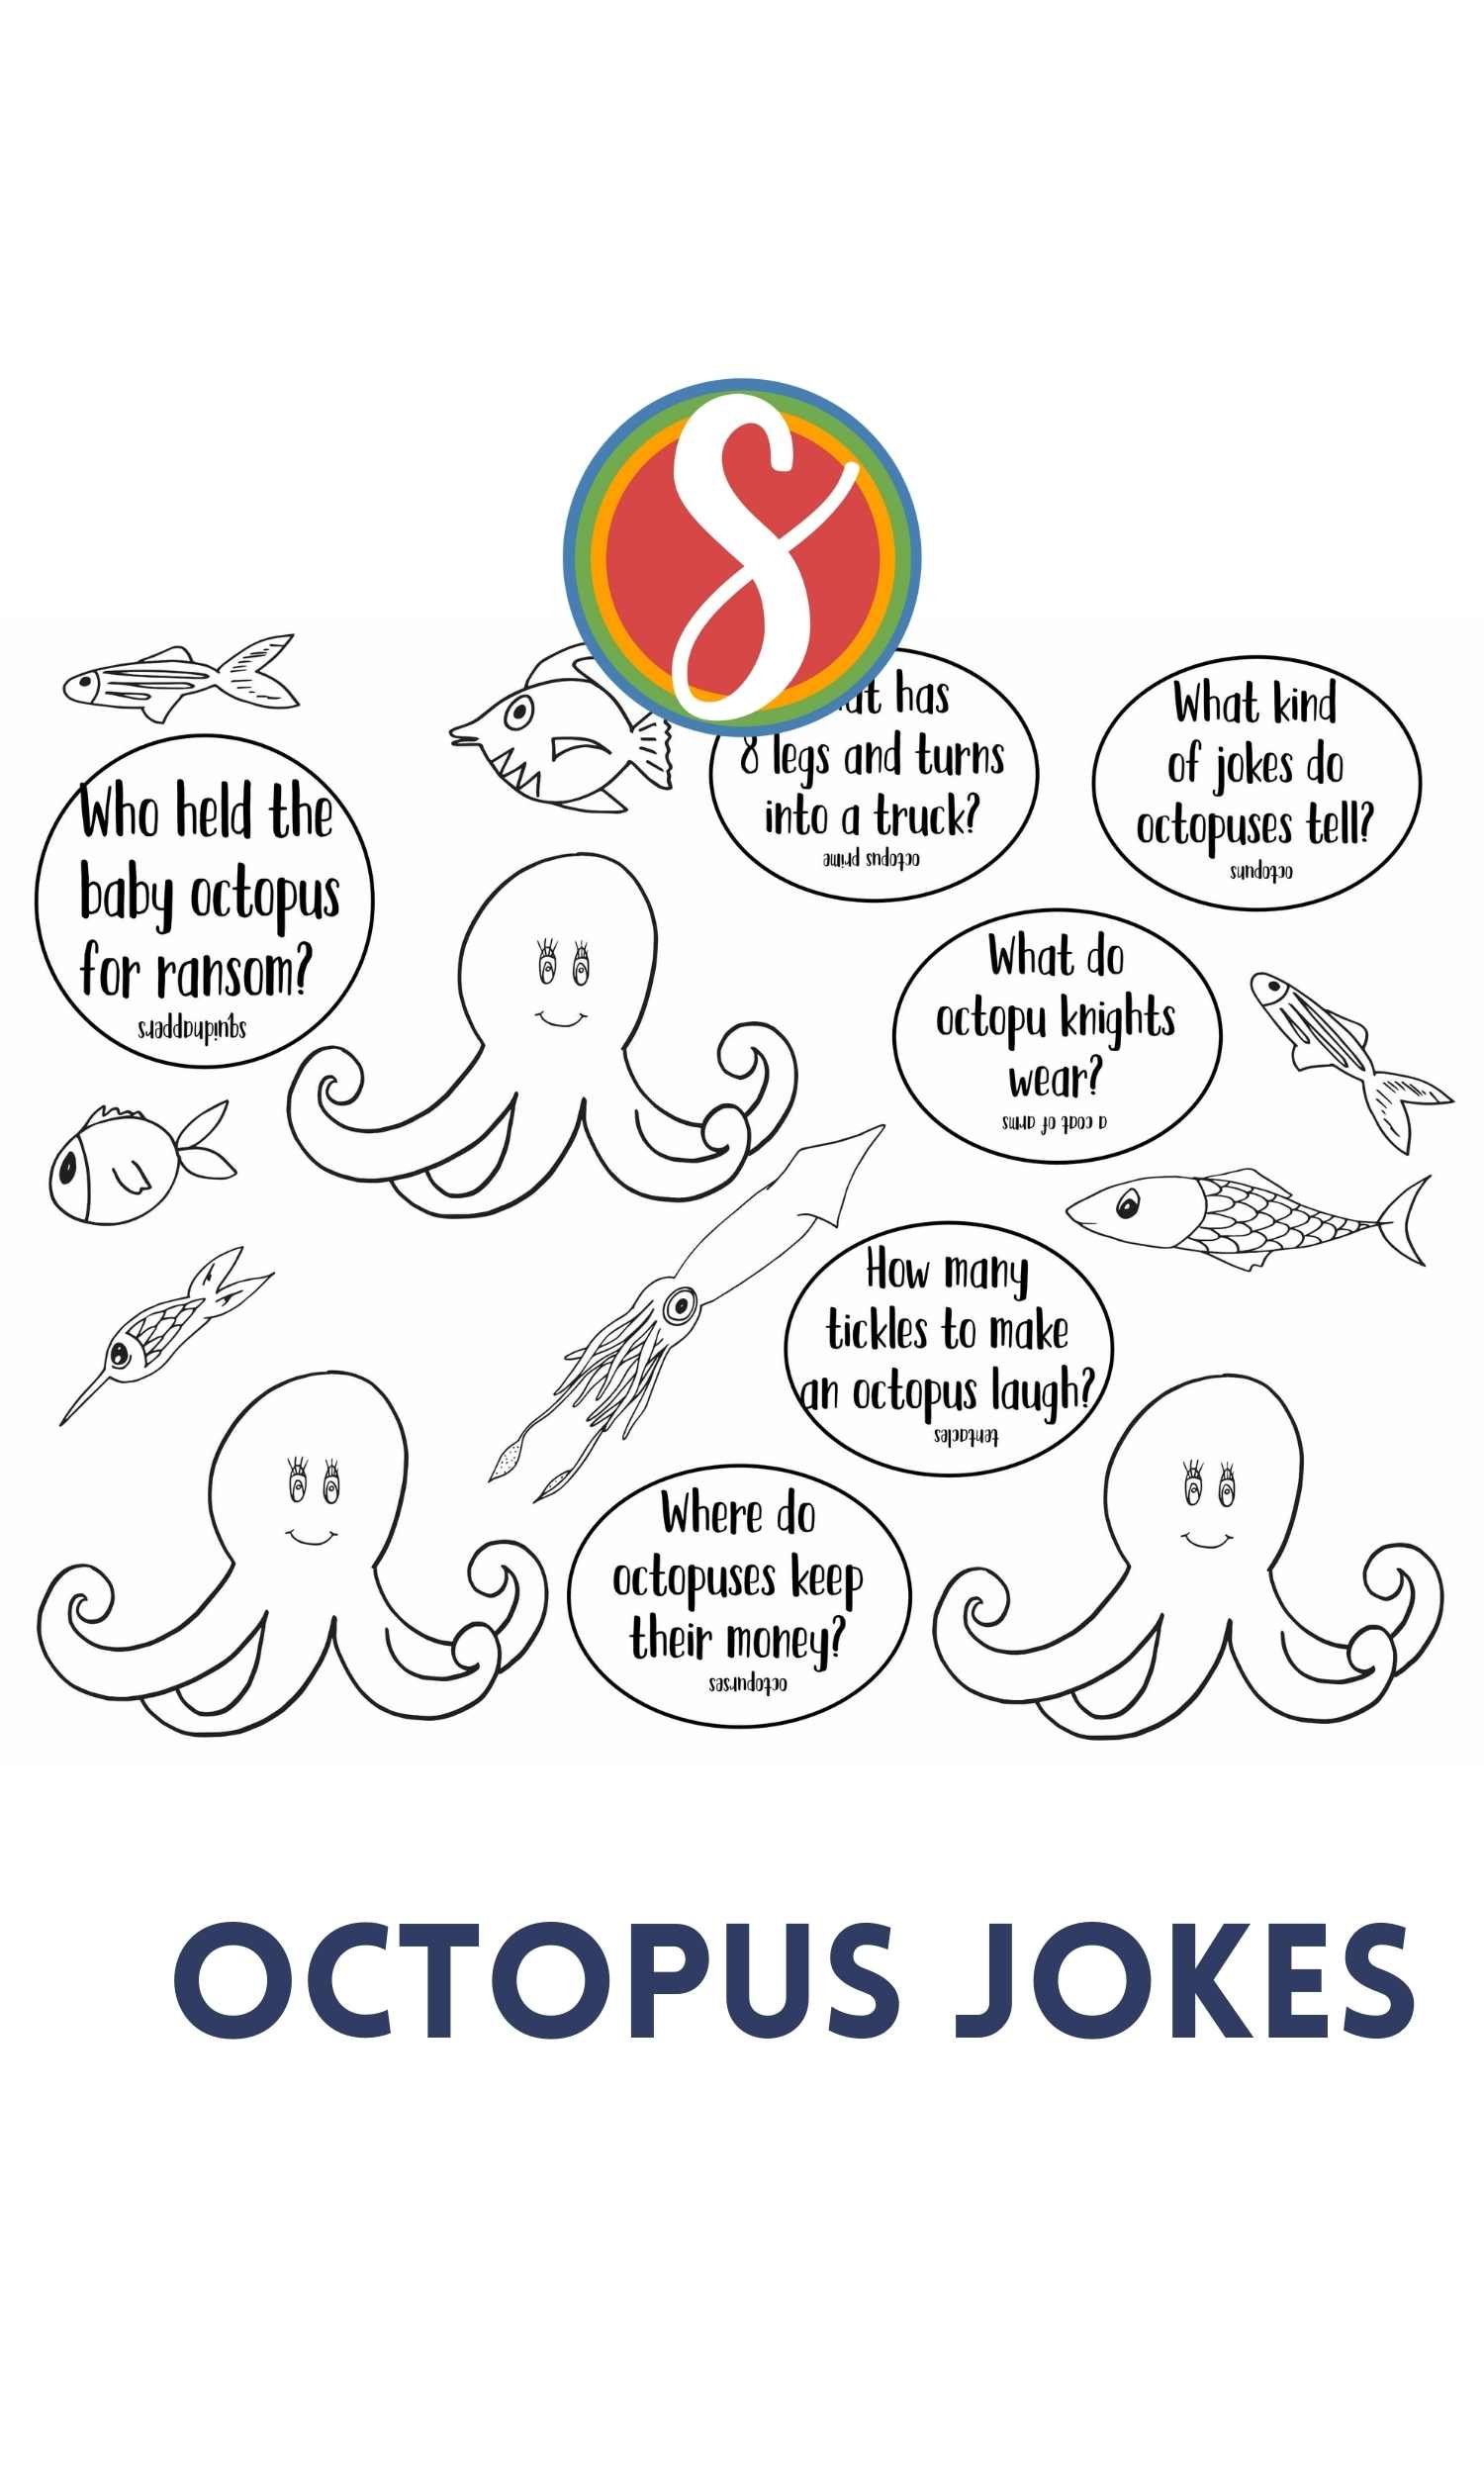 little simple octopus drawings to color, little simple squid drawings to color, and circles with text of octopus jokes